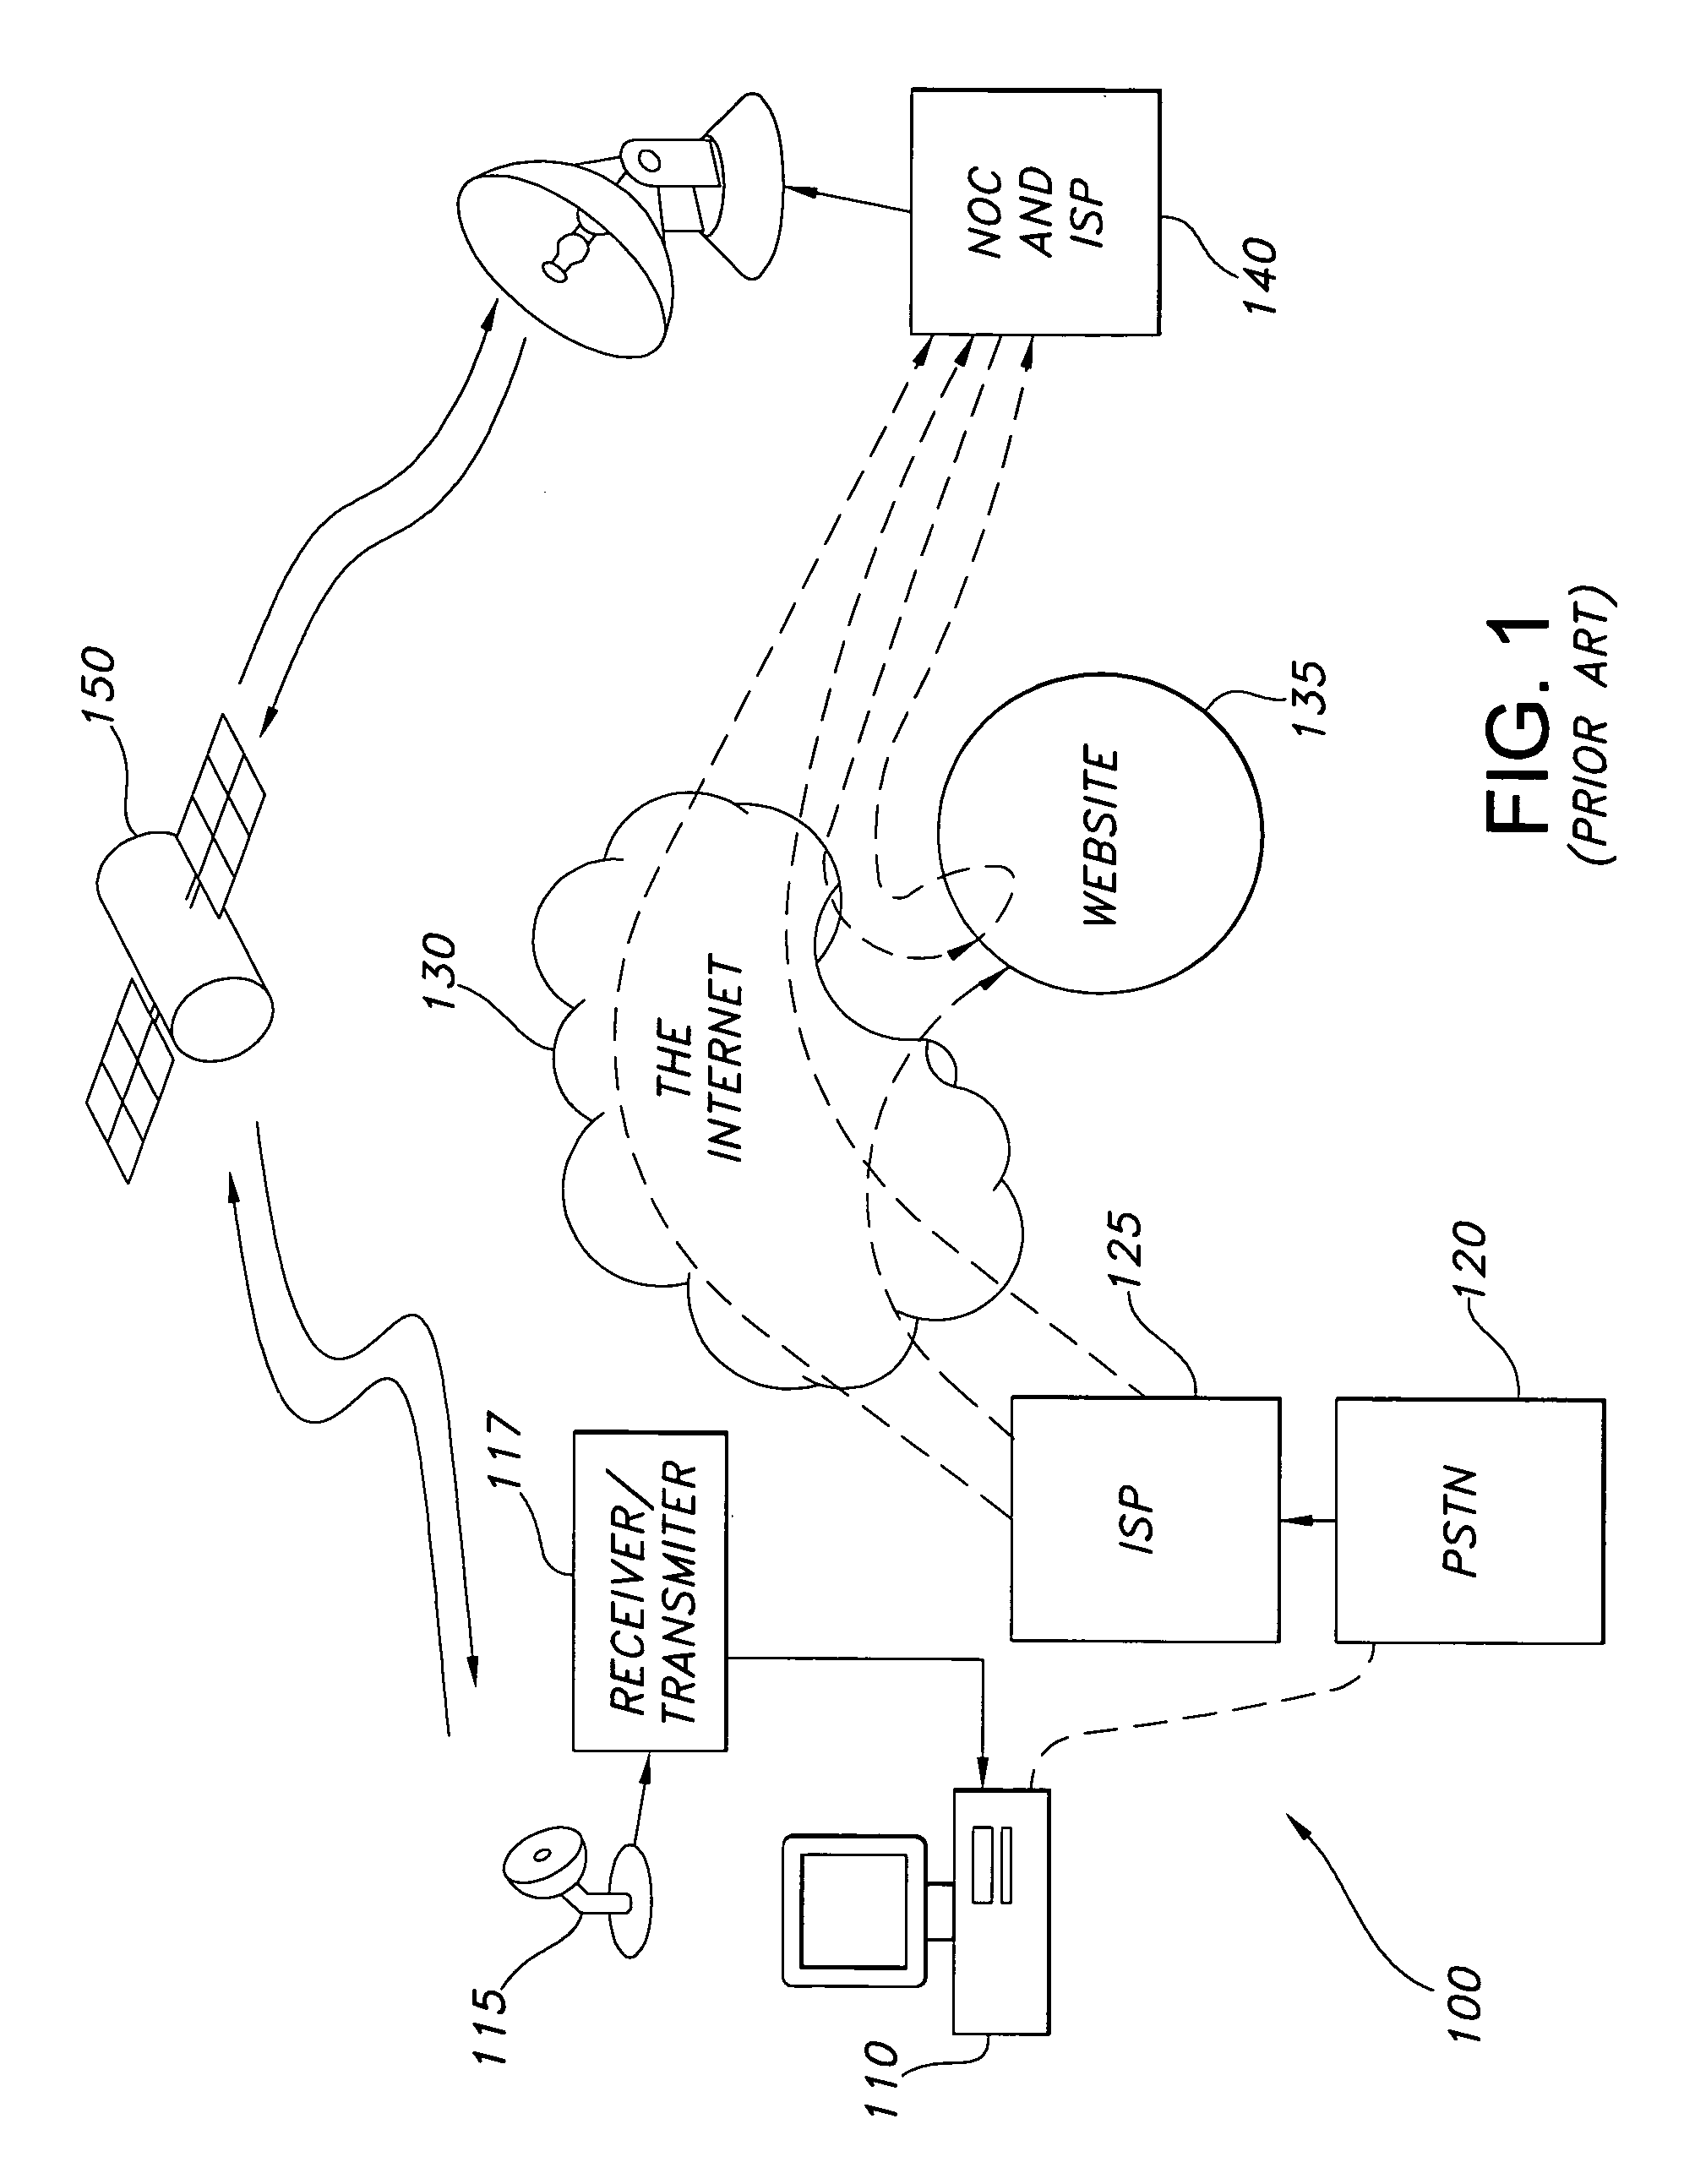 Low-latency/low link margin airborne satellite internet system and method using COTS infrastructure